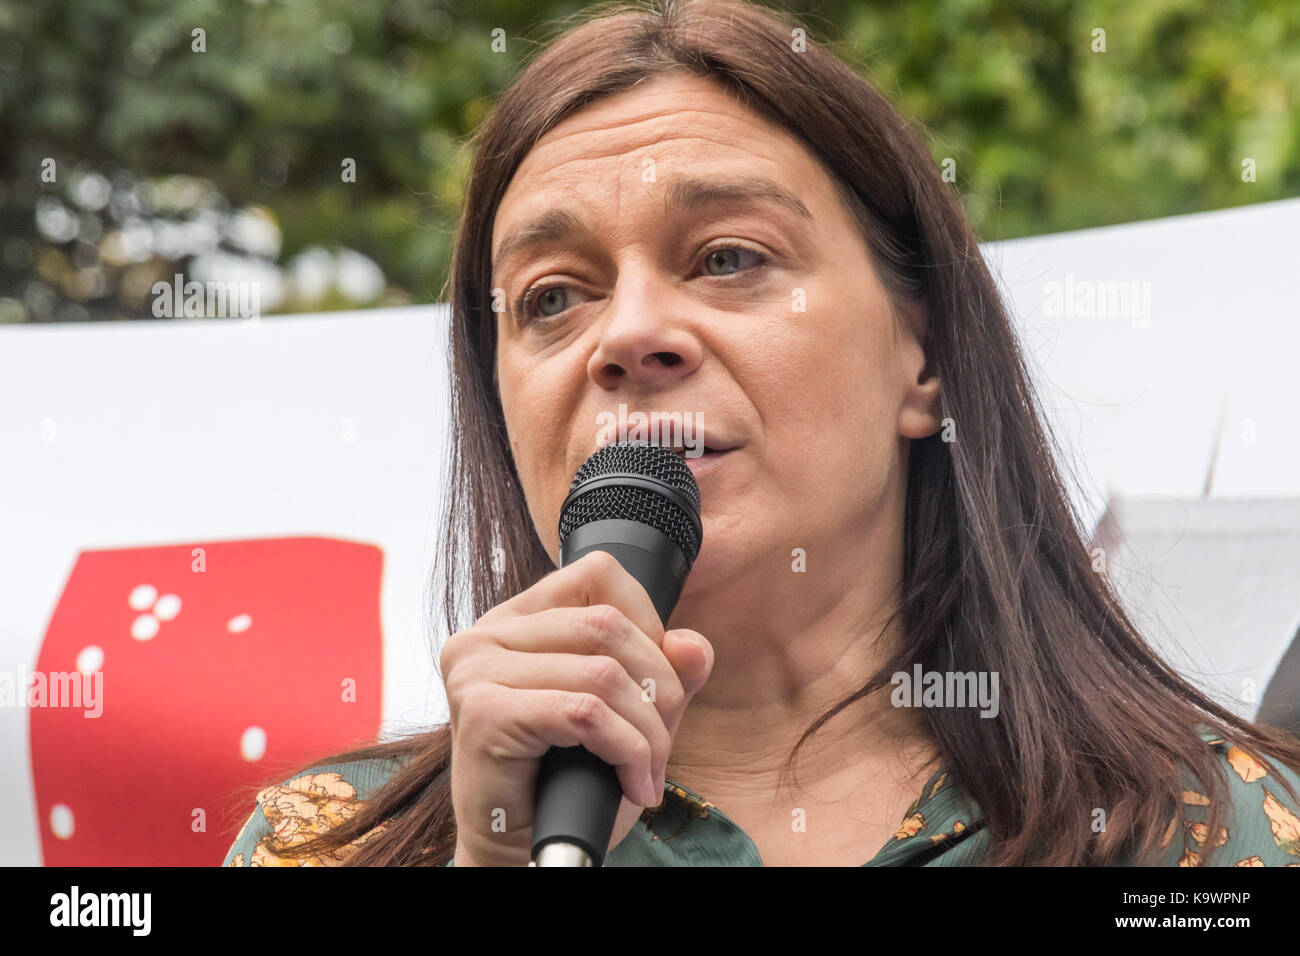 London, UK. 23rd Sep, 2017. London, UK. 23rd September 2017. Pilgrim Tucker, a Justice for Grenfell campaigner, speaks at the rally in Tottenham befopre hundredsto Finsbury Park against the so called Haringey Development Vehicle, under which Haringey Council is making a huge transfer of council housing to Australian multinational Lendlease. This will result in the imminent demolition of over 1,300 council homes on the Northumberland Park estate, followed by similar loss of social housing across the whole of the borough. At Â£2 billion, his is the largest giveaway of council housing and a Stock Photo